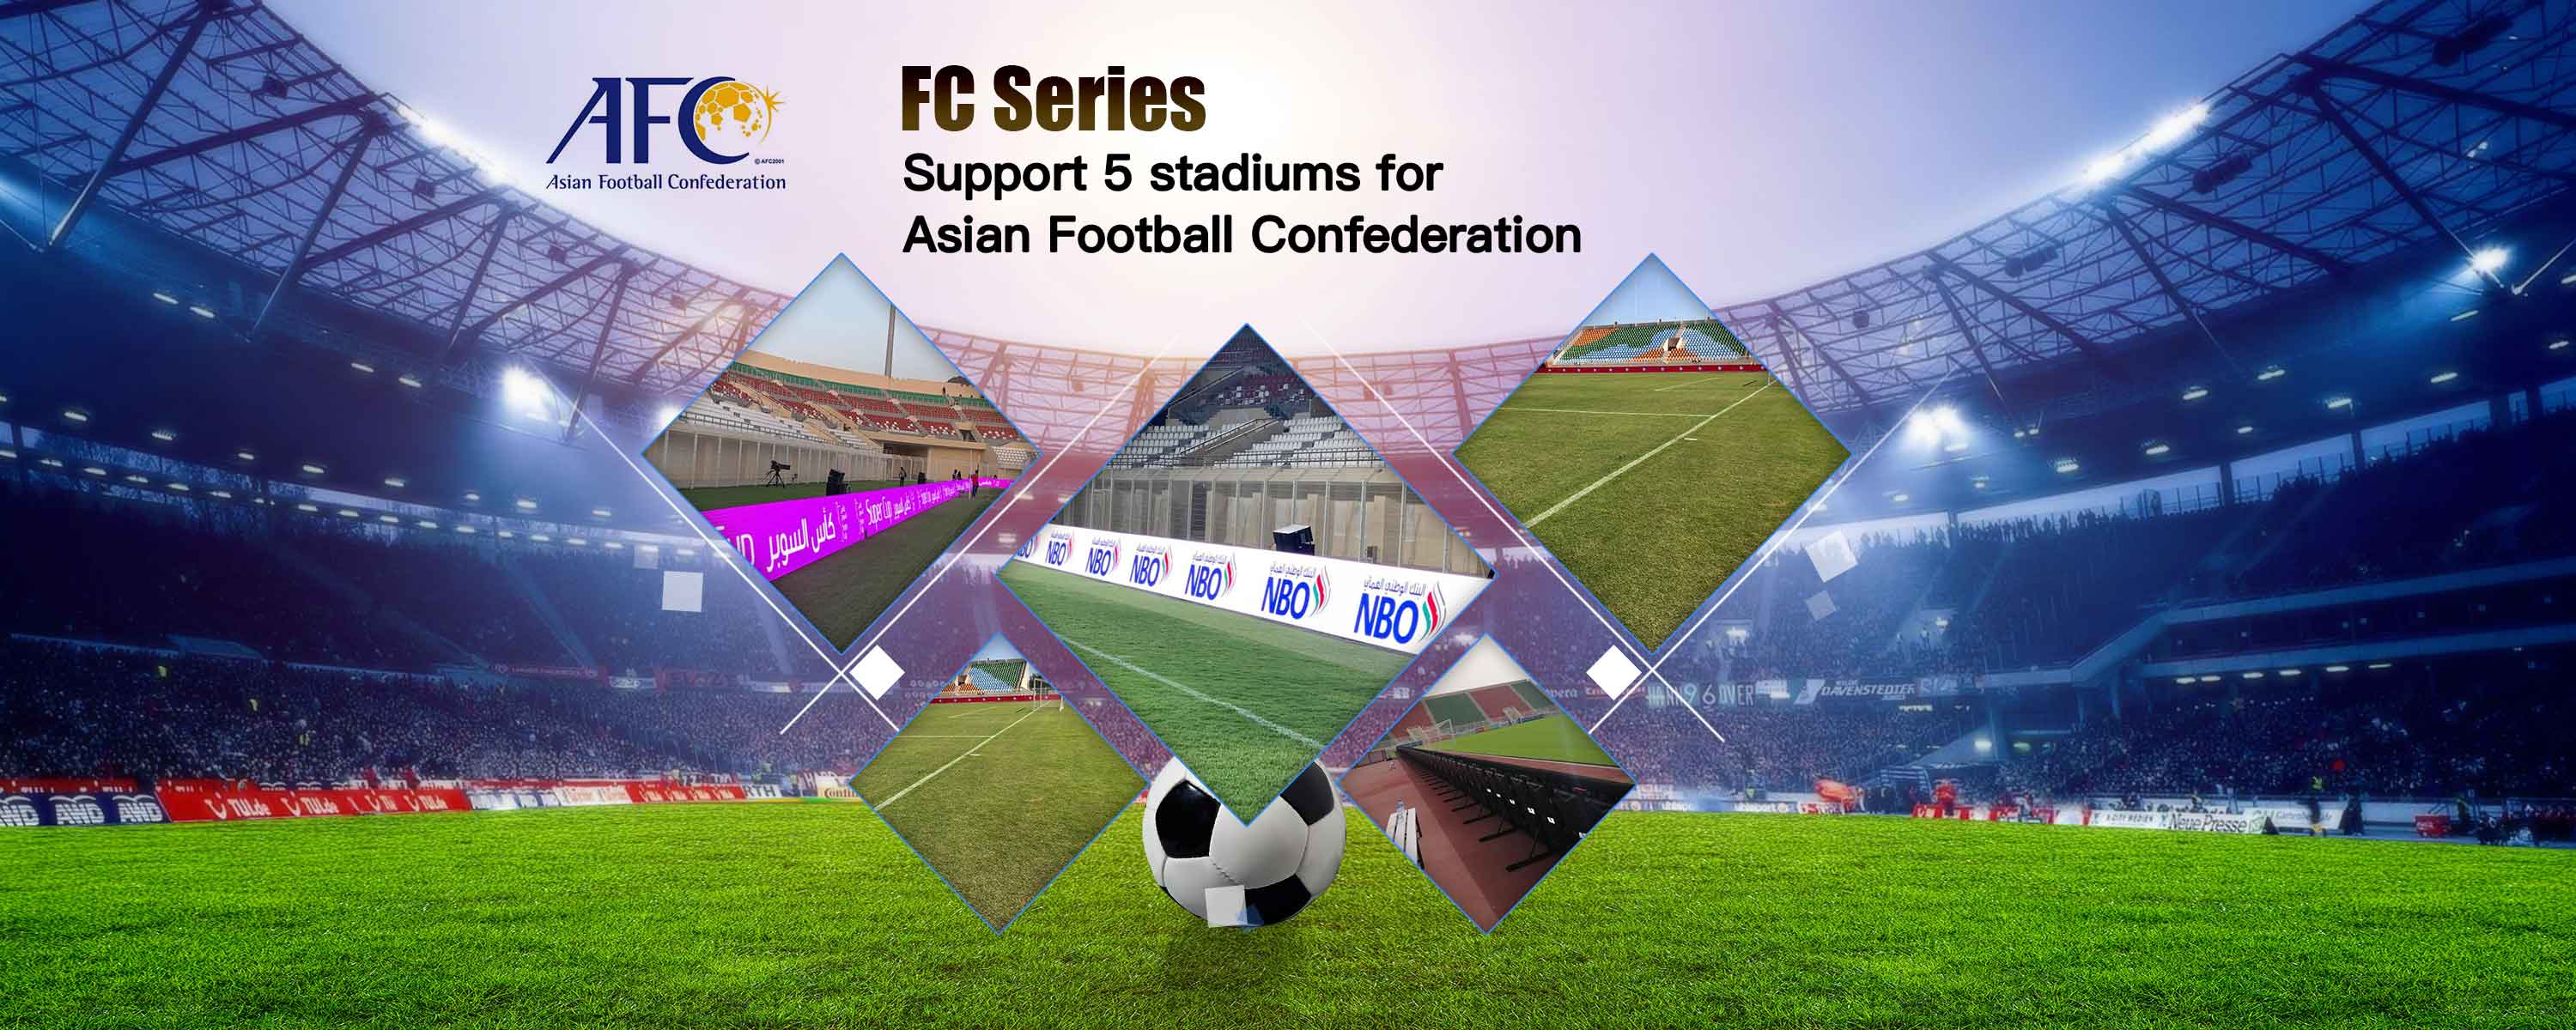 Outdoor Stadium Fixed LED Display Screen Solution